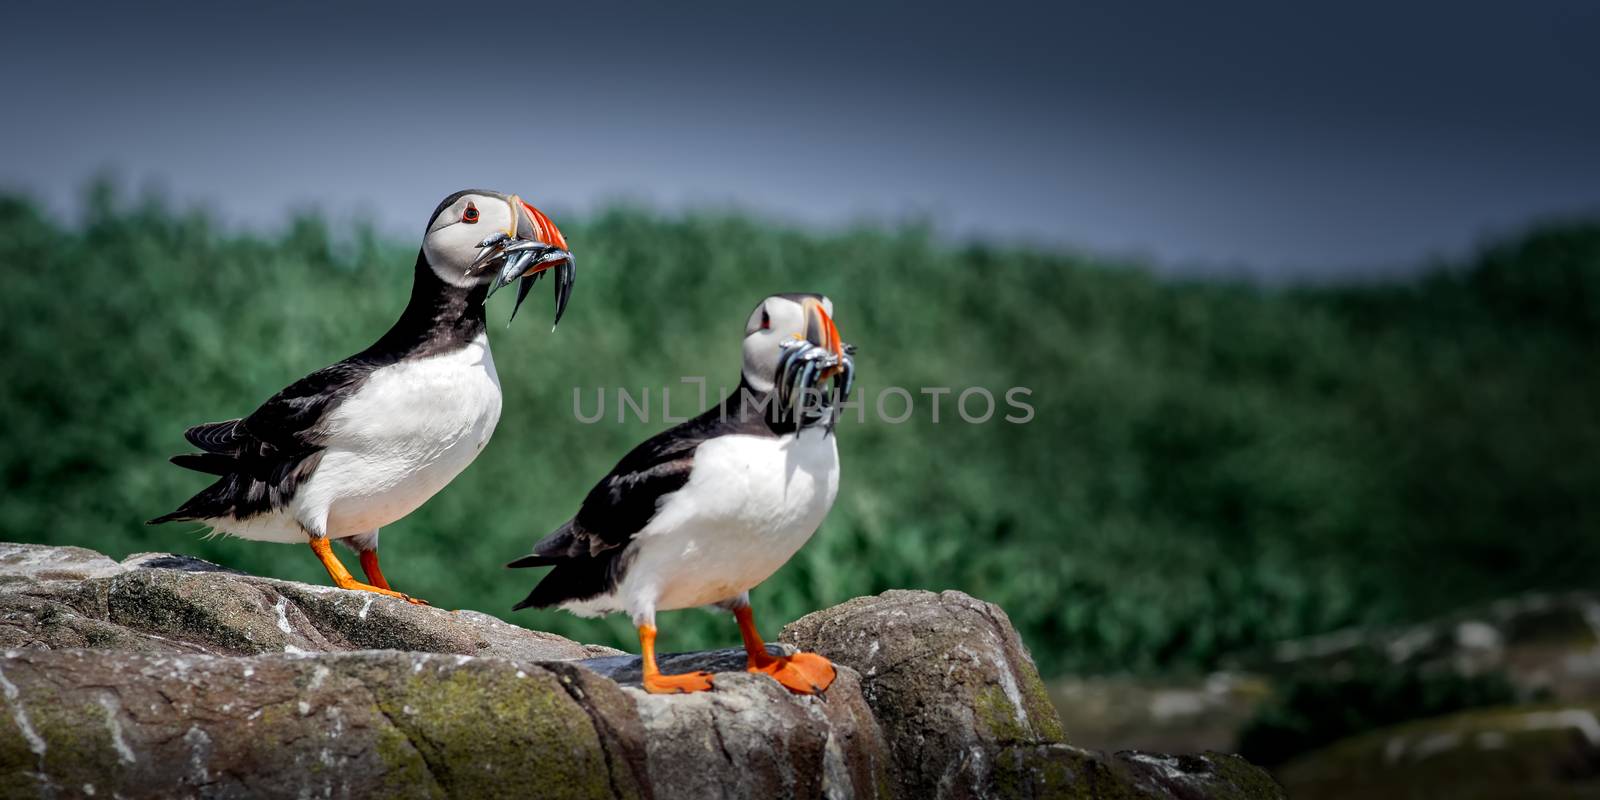 This is the Atlantic Puffin (Fratercula arctica) seen here returning from a foraging trip for food with its favourite food Sandeels (Ammodytes spp) and may make several journeys a day to feed its young.
The conservation status of the Atlantic Puffin is of concern and was Red listed in ïÍBirds of Conservation ConcernÍÍ. They can be long lived birds, living in excess of 20 years and form long term relationships. They breed in colonies and nest in burrows to which they return each year and clean ready for the new arrival. The female lays just one egg which they take in turns to incubate and feed the chick. Often known as the Sea Parrot because of their colourful bills, which they shed after the breeding season.